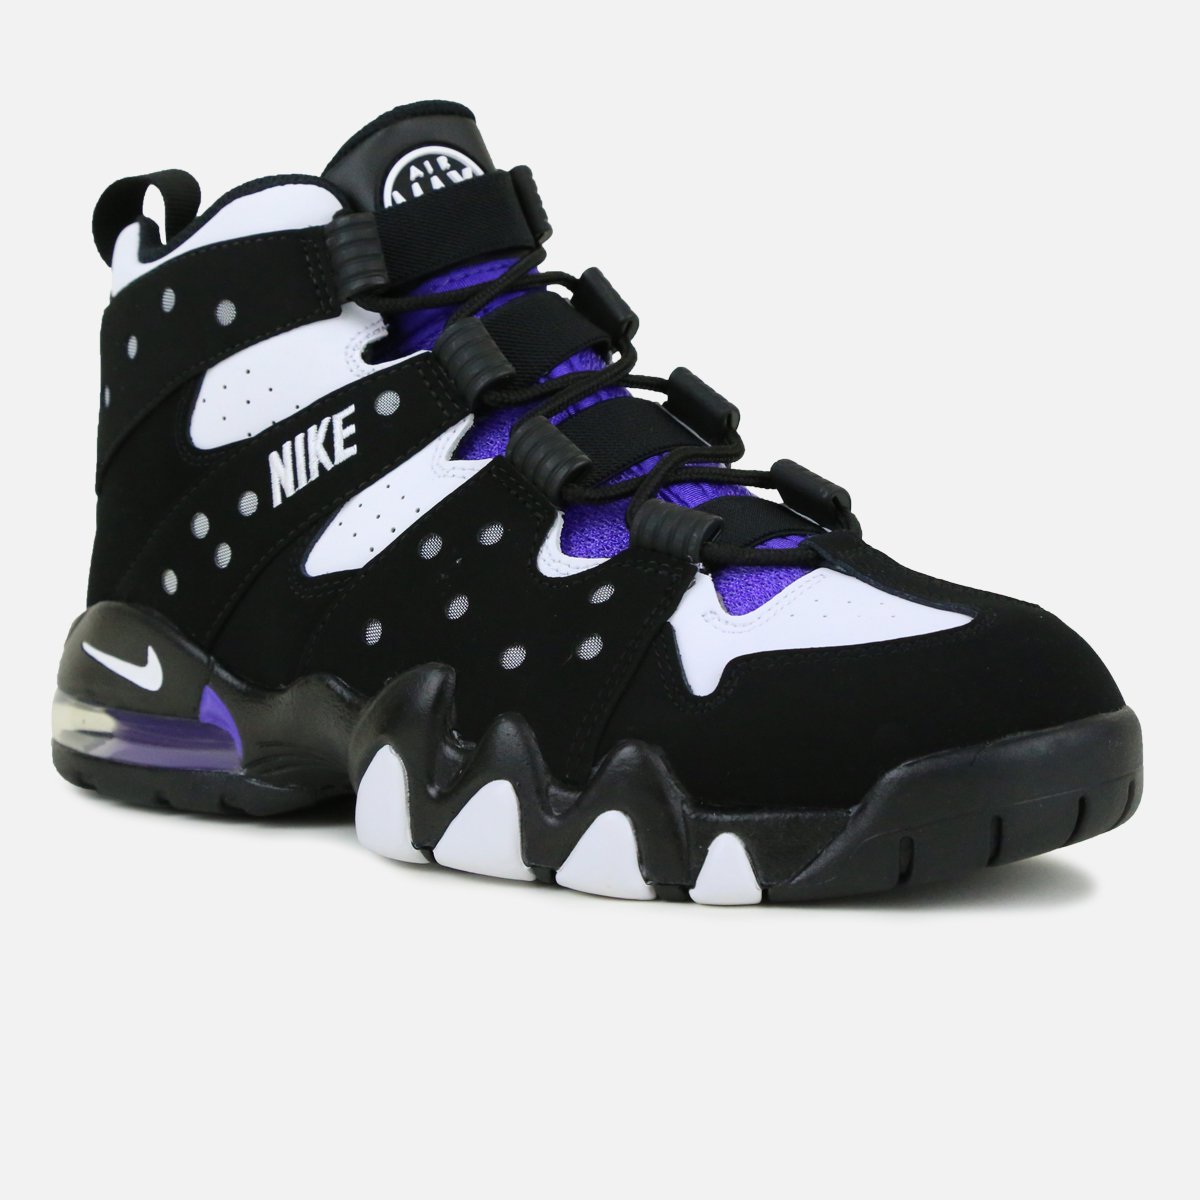 Nike Air Max 2 CB '94 - Black / Pure Purple-White - Images, Release ...